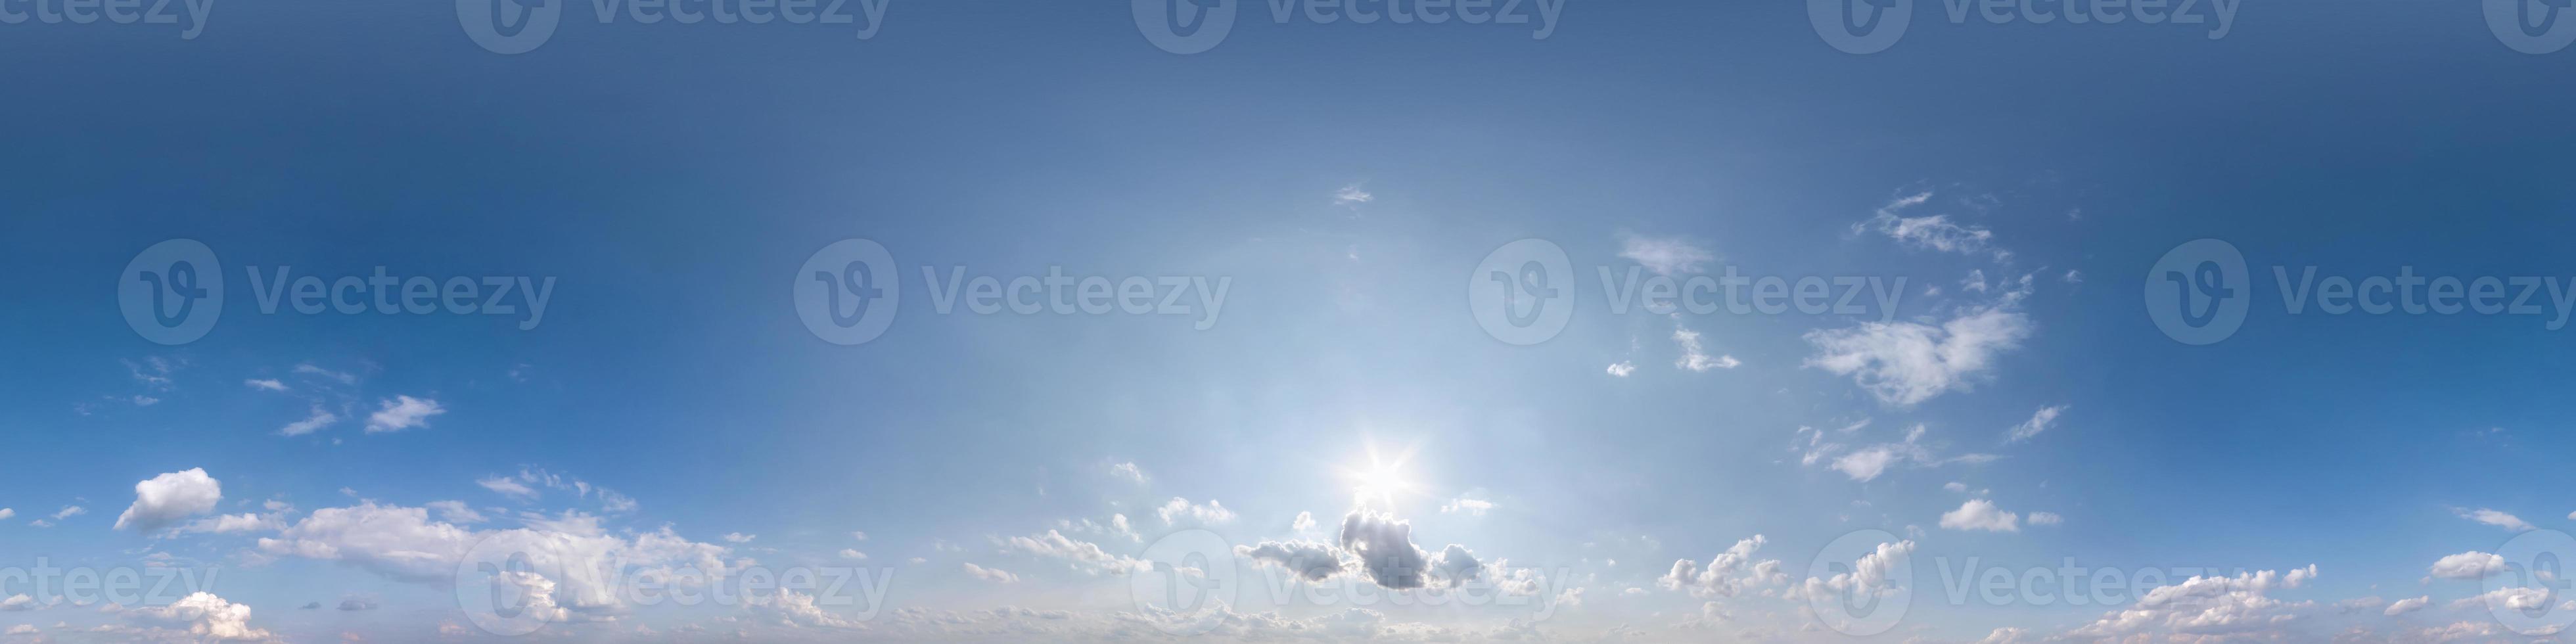 Seamless blue sky hdri panorama 360 degrees angle view with zenith and beautiful clouds for use in 3d graphics as sky dome or edit drone shot. use for sky replacement photo